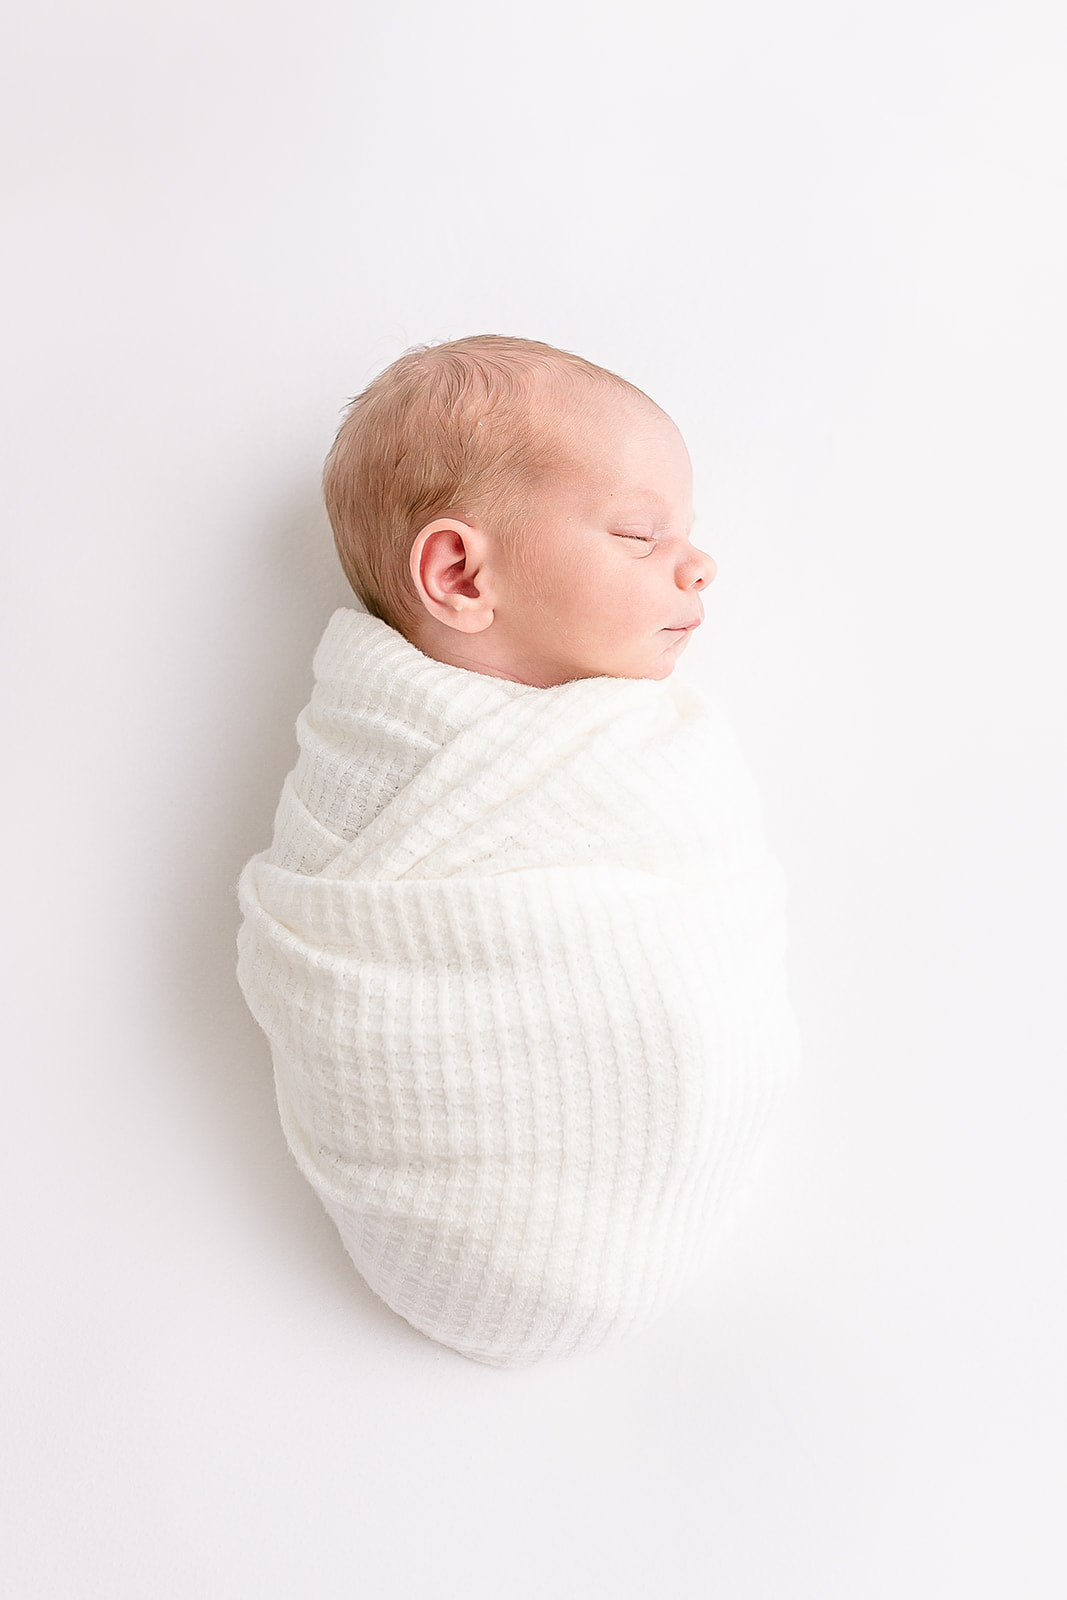 A newborn baby sleeps in a white swaddle in a studio Portland Doulas